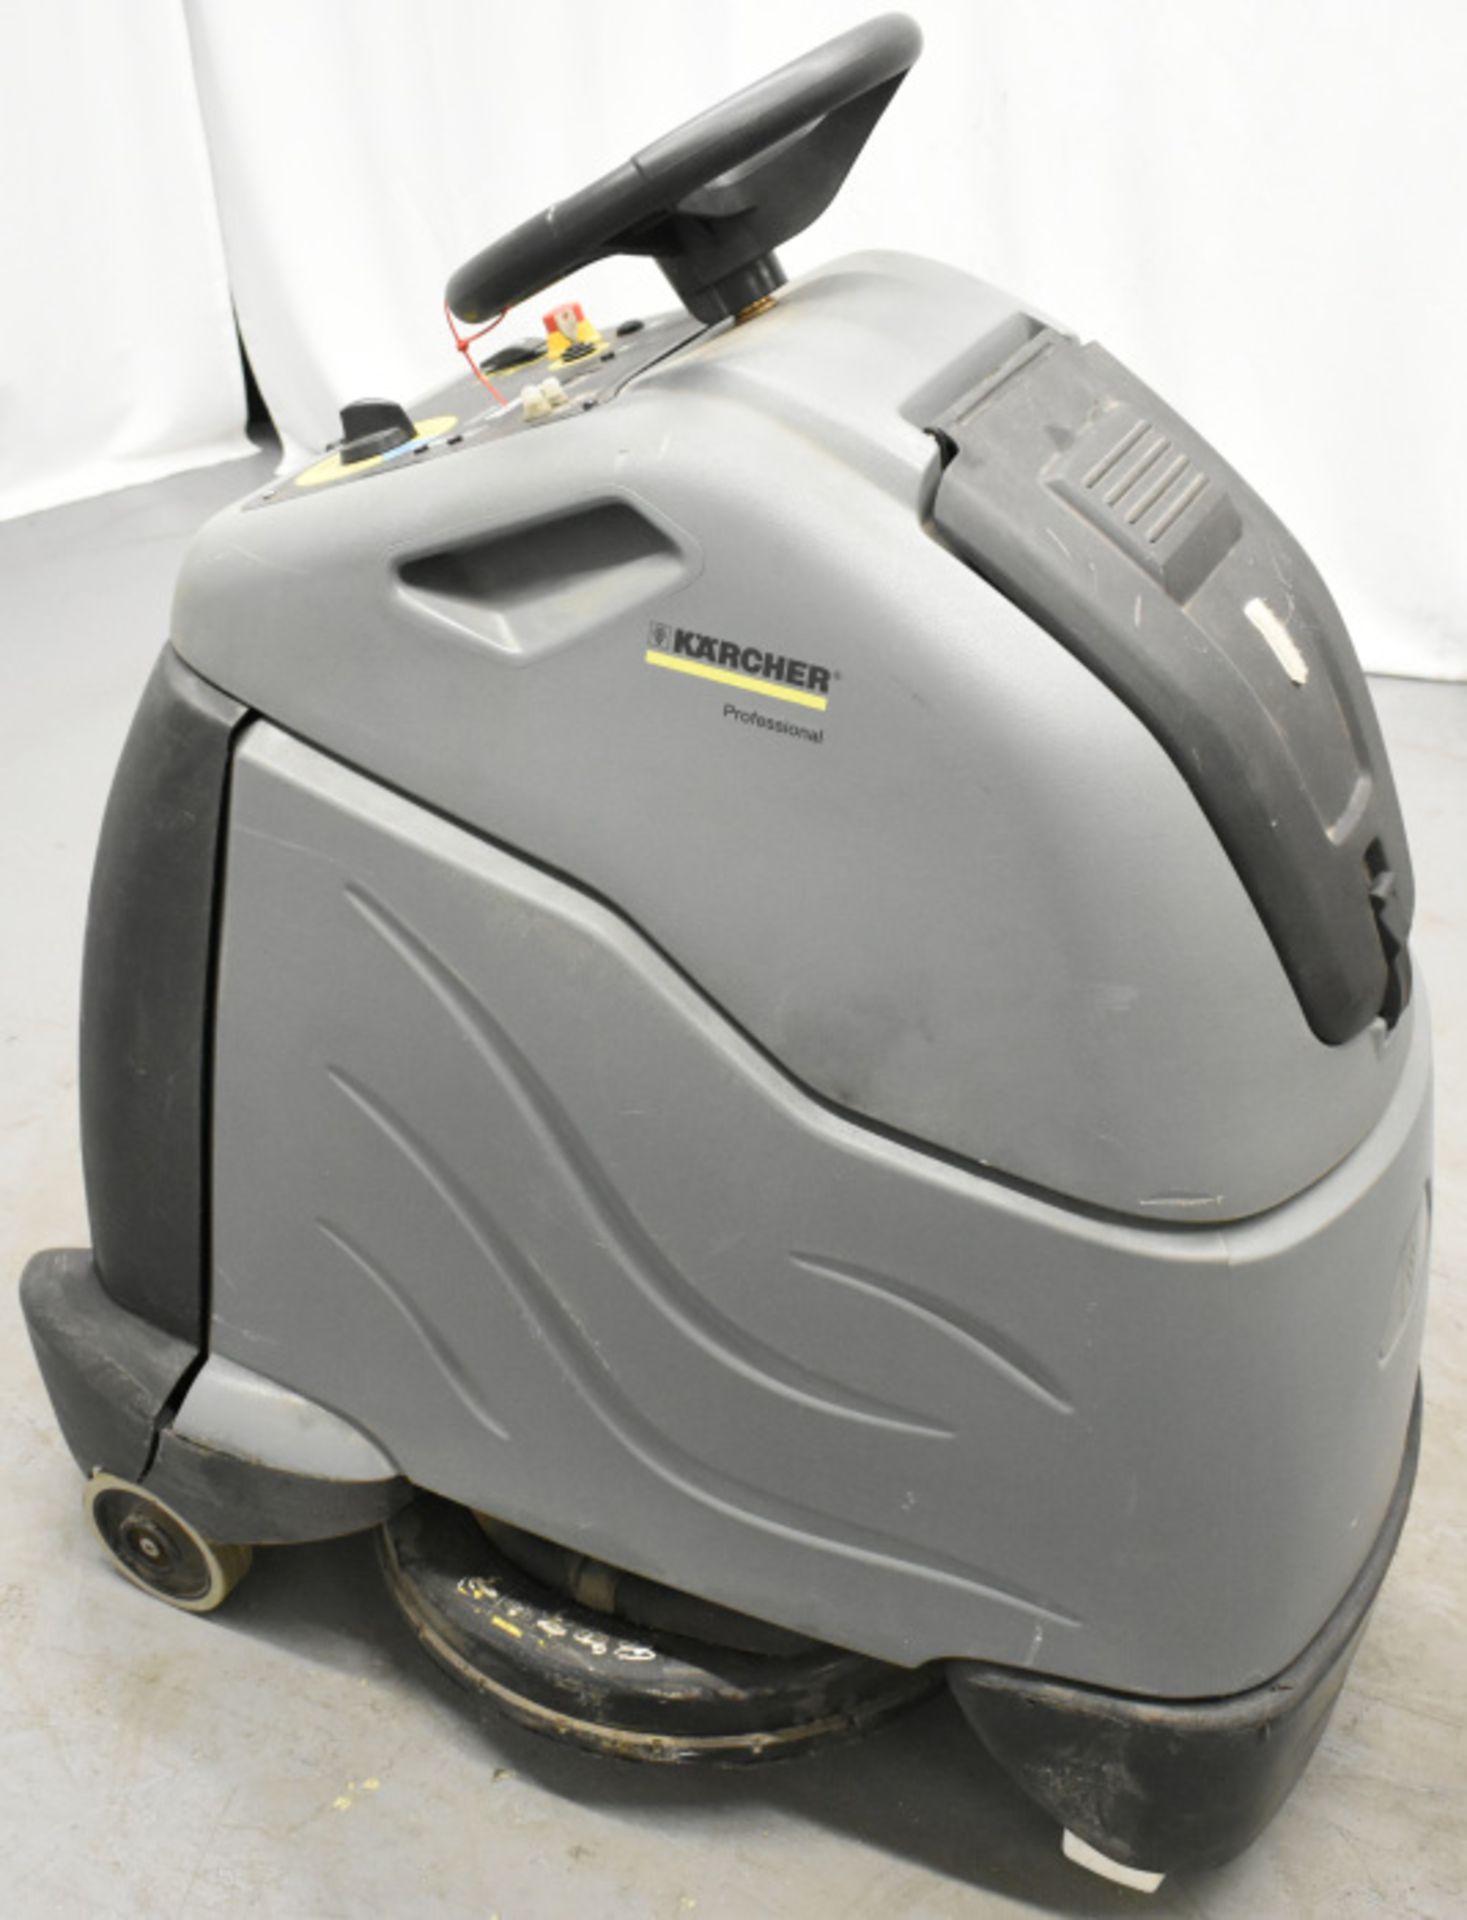 Karcher Professional BDP 50/2000 RS Step On Polishing Machine - Image 2 of 9